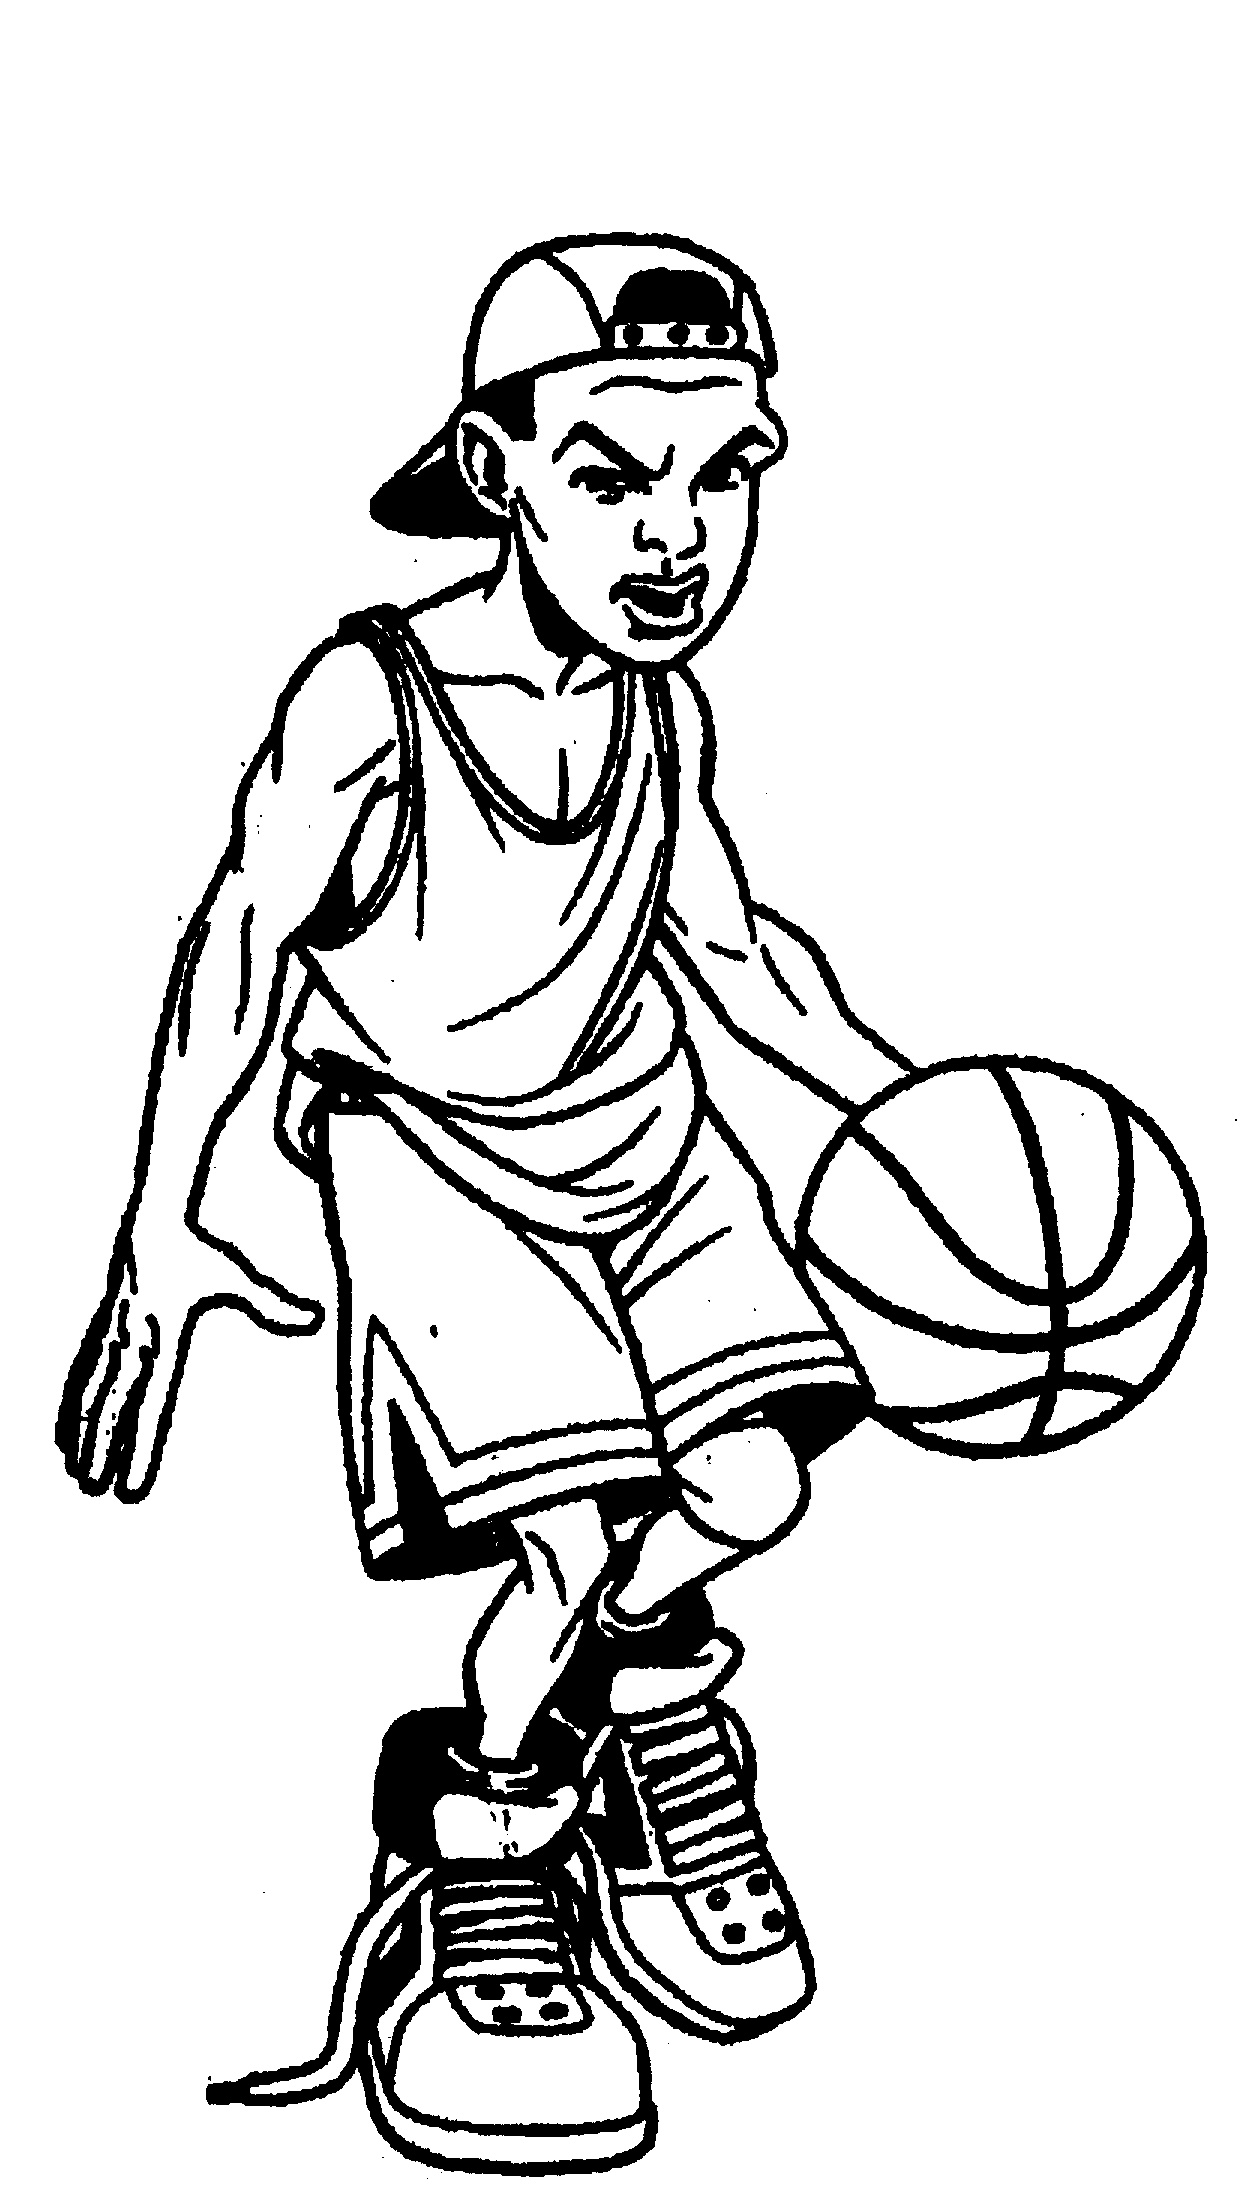 Simple Basketball Player Drawing Draw a few more ellipses.